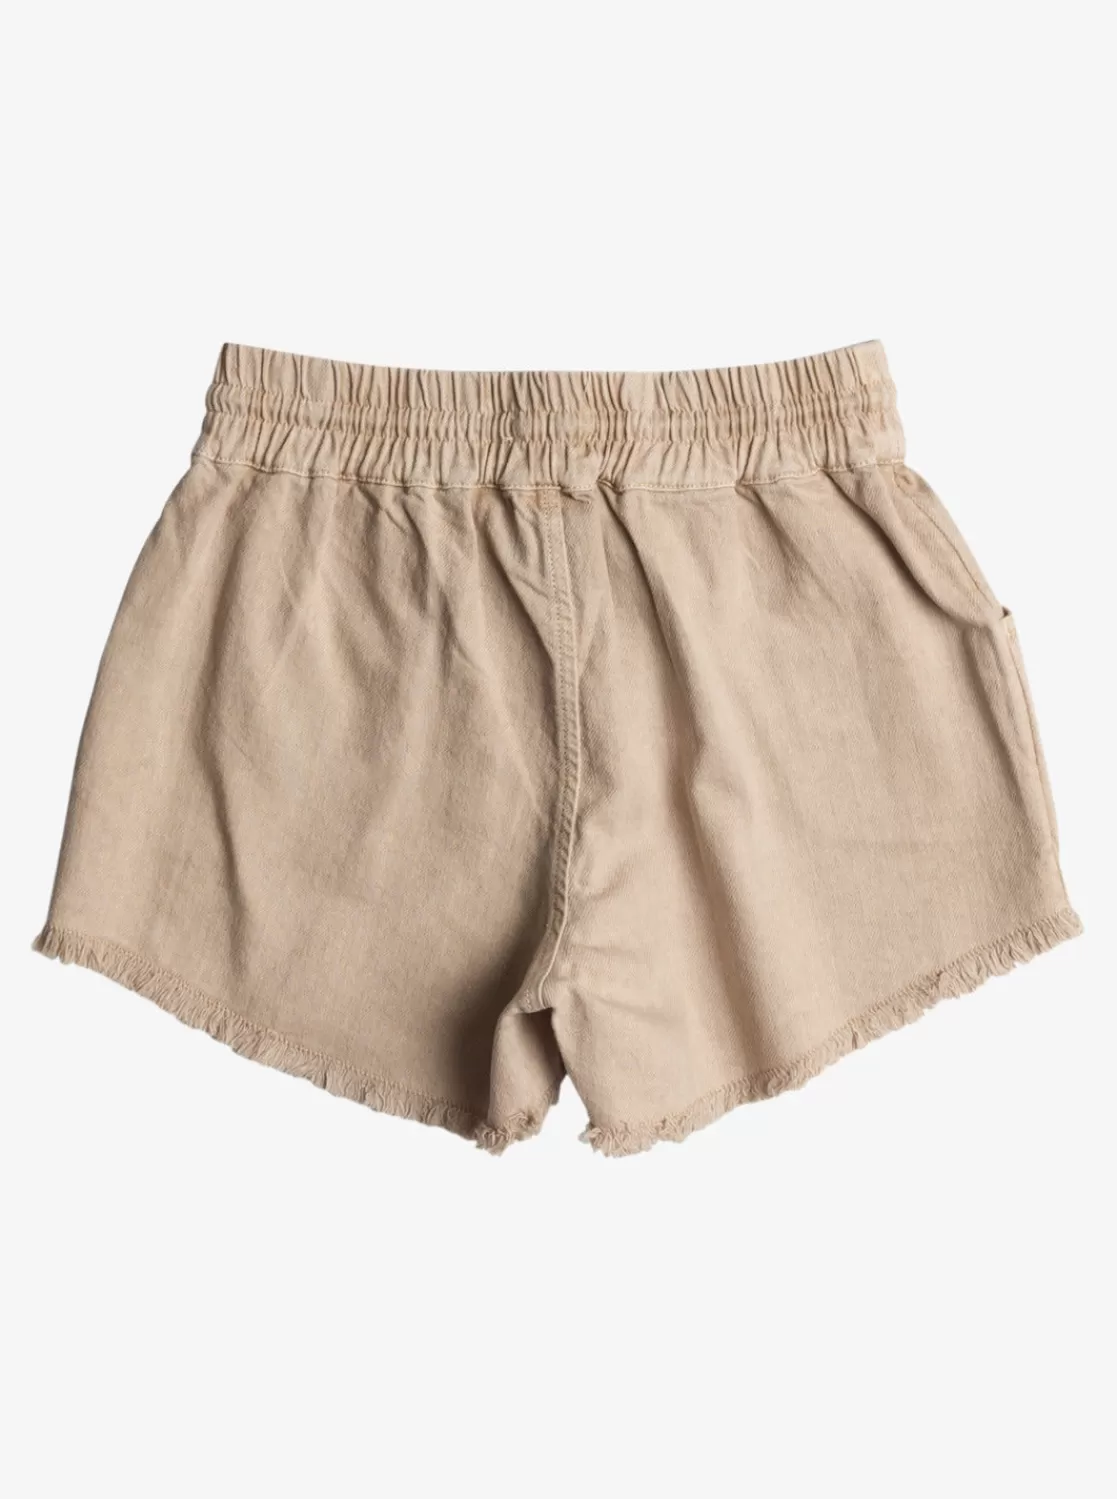 Girls 4-16 Scenic Route Twill Shorts-ROXY Outlet